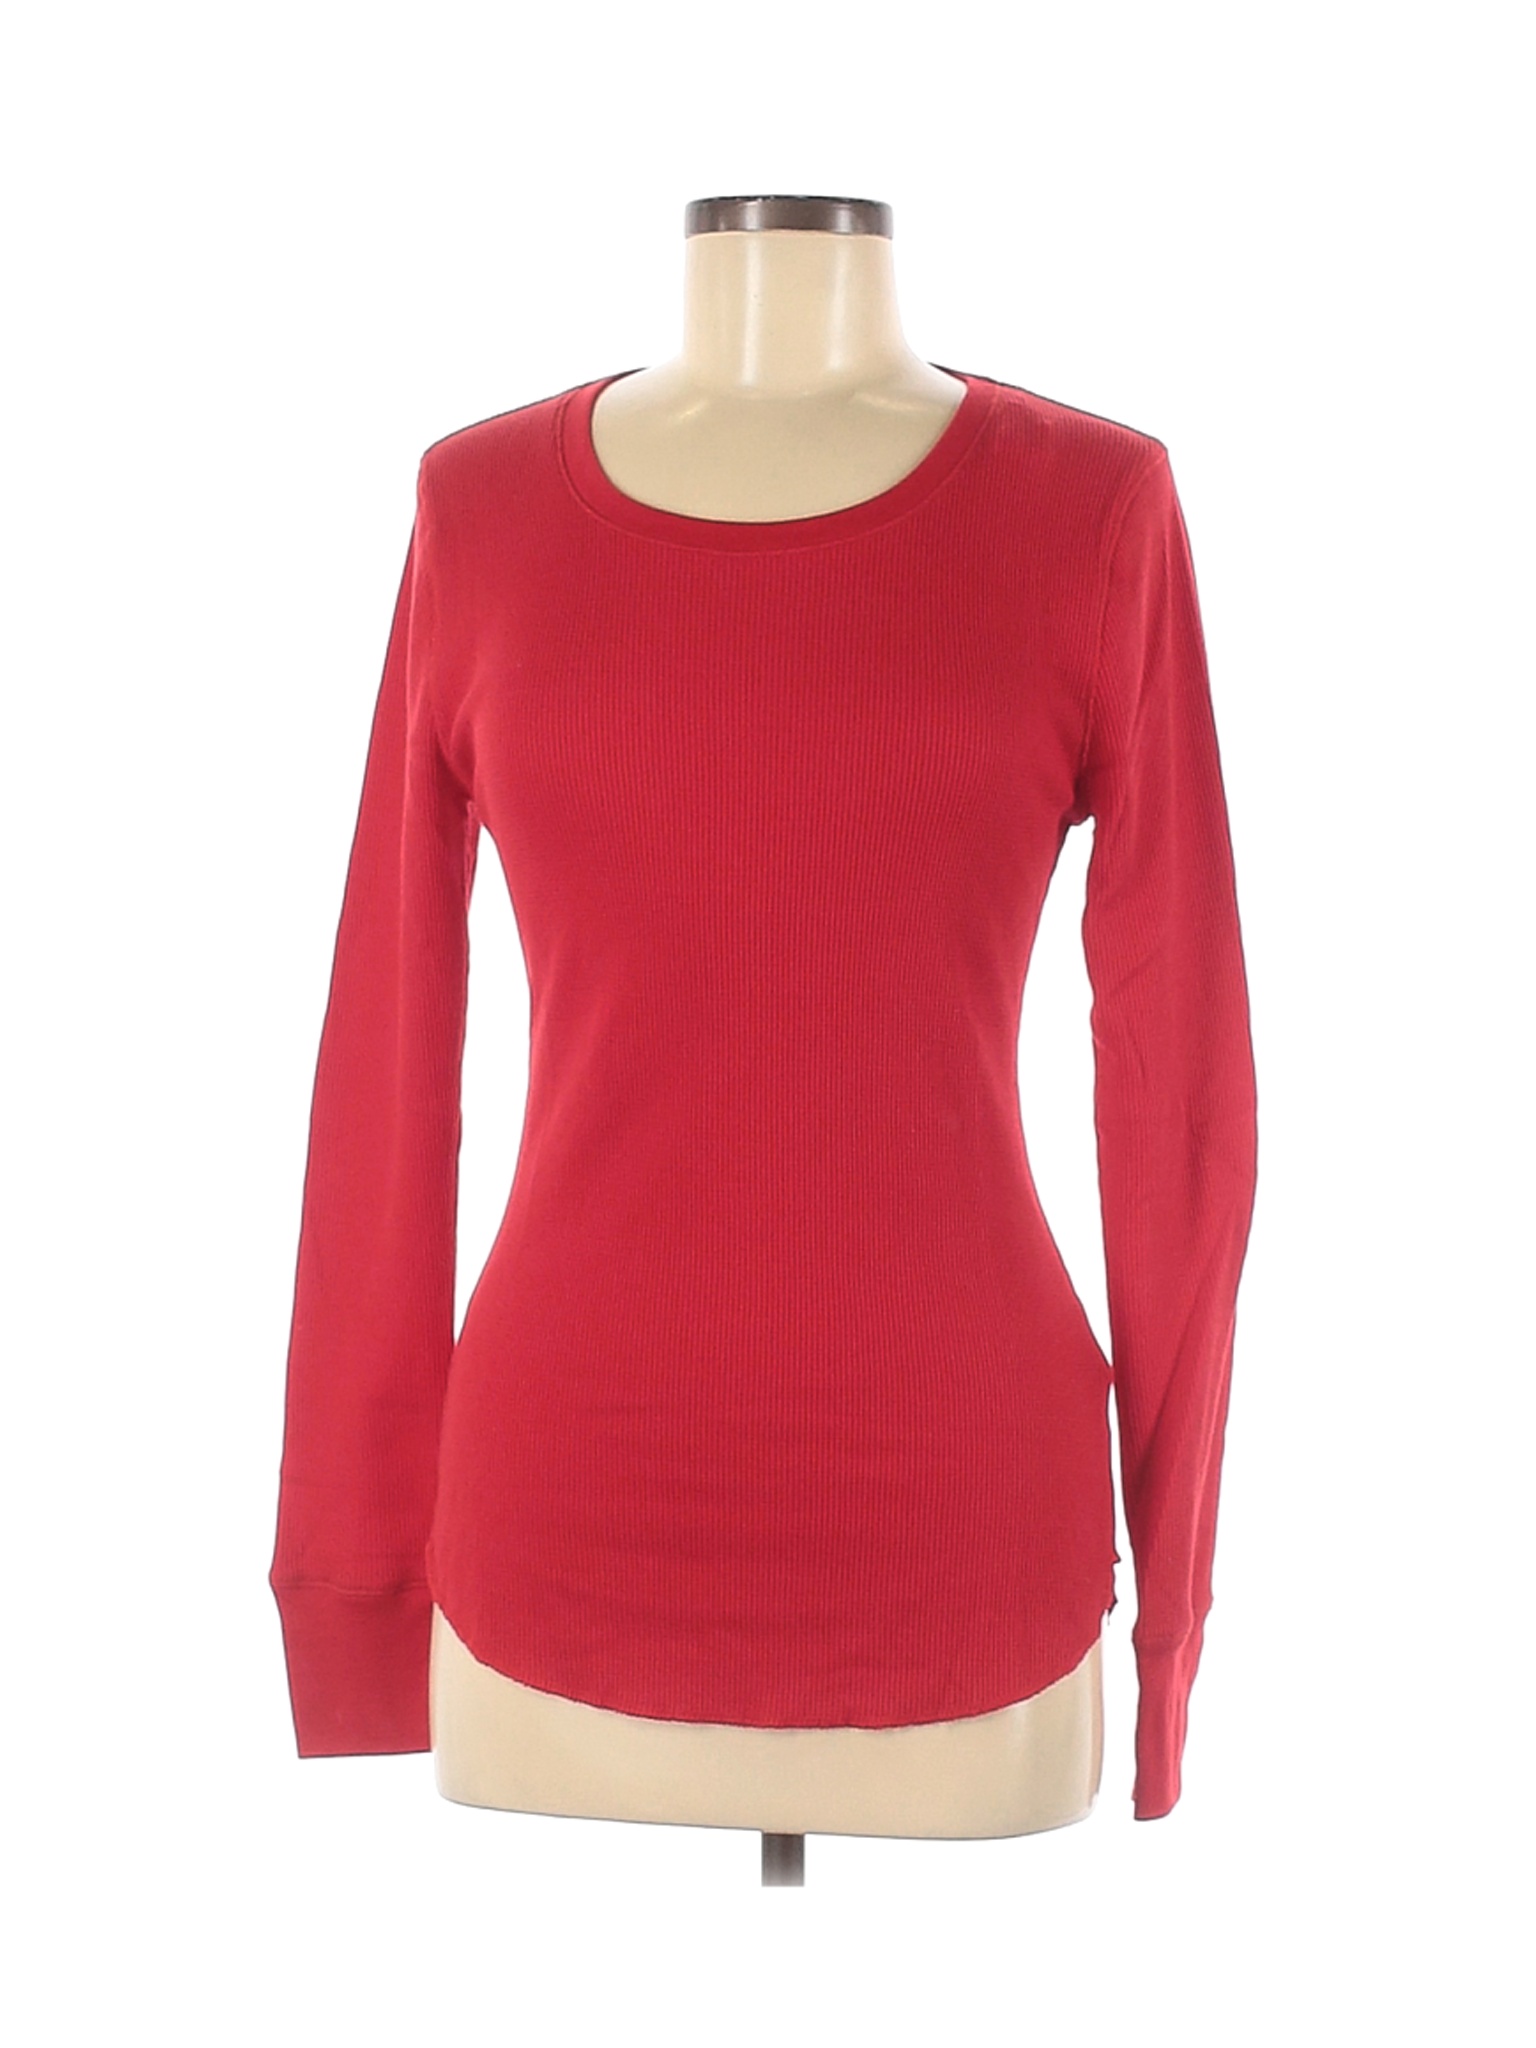 NWT Old Navy Women Red Thermal Top M | eBay